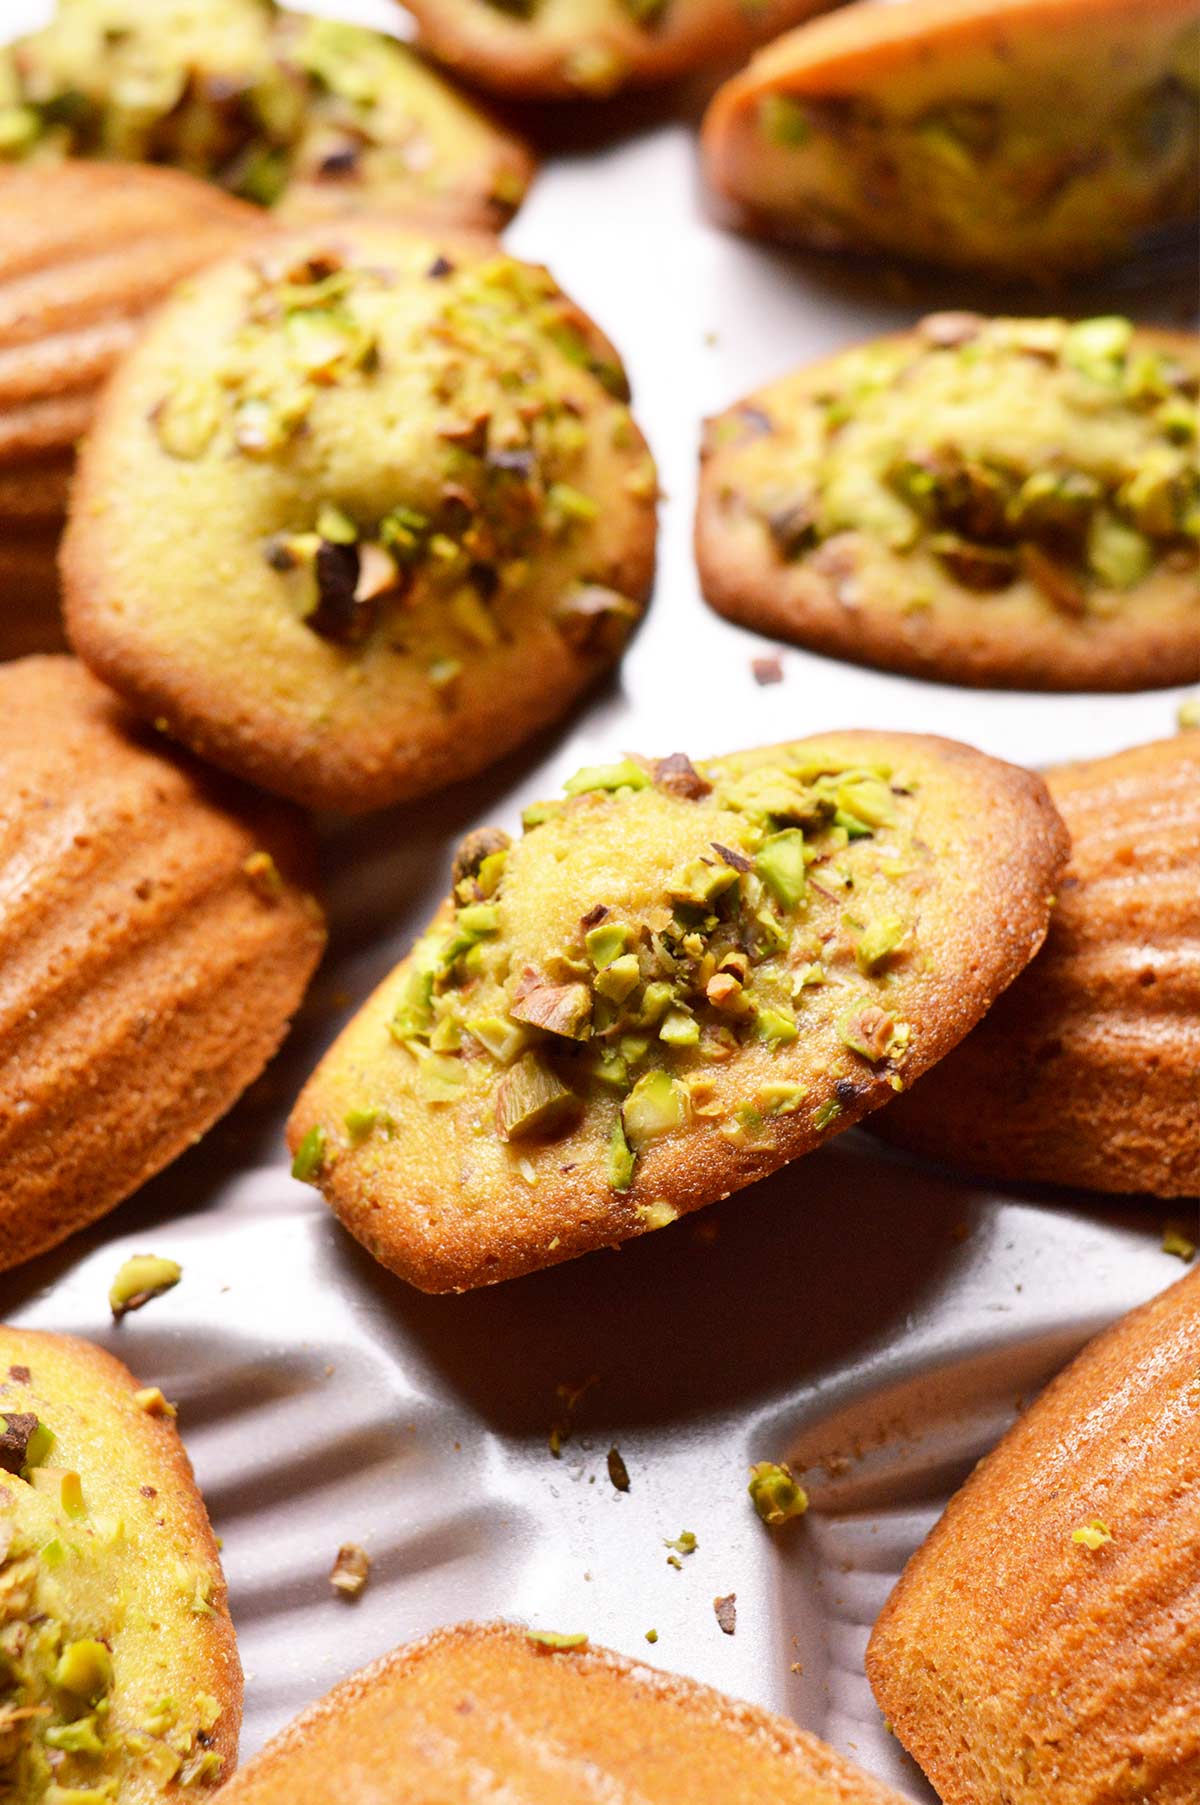 pistachio madeleines made with freshly grounded roasted pistachios